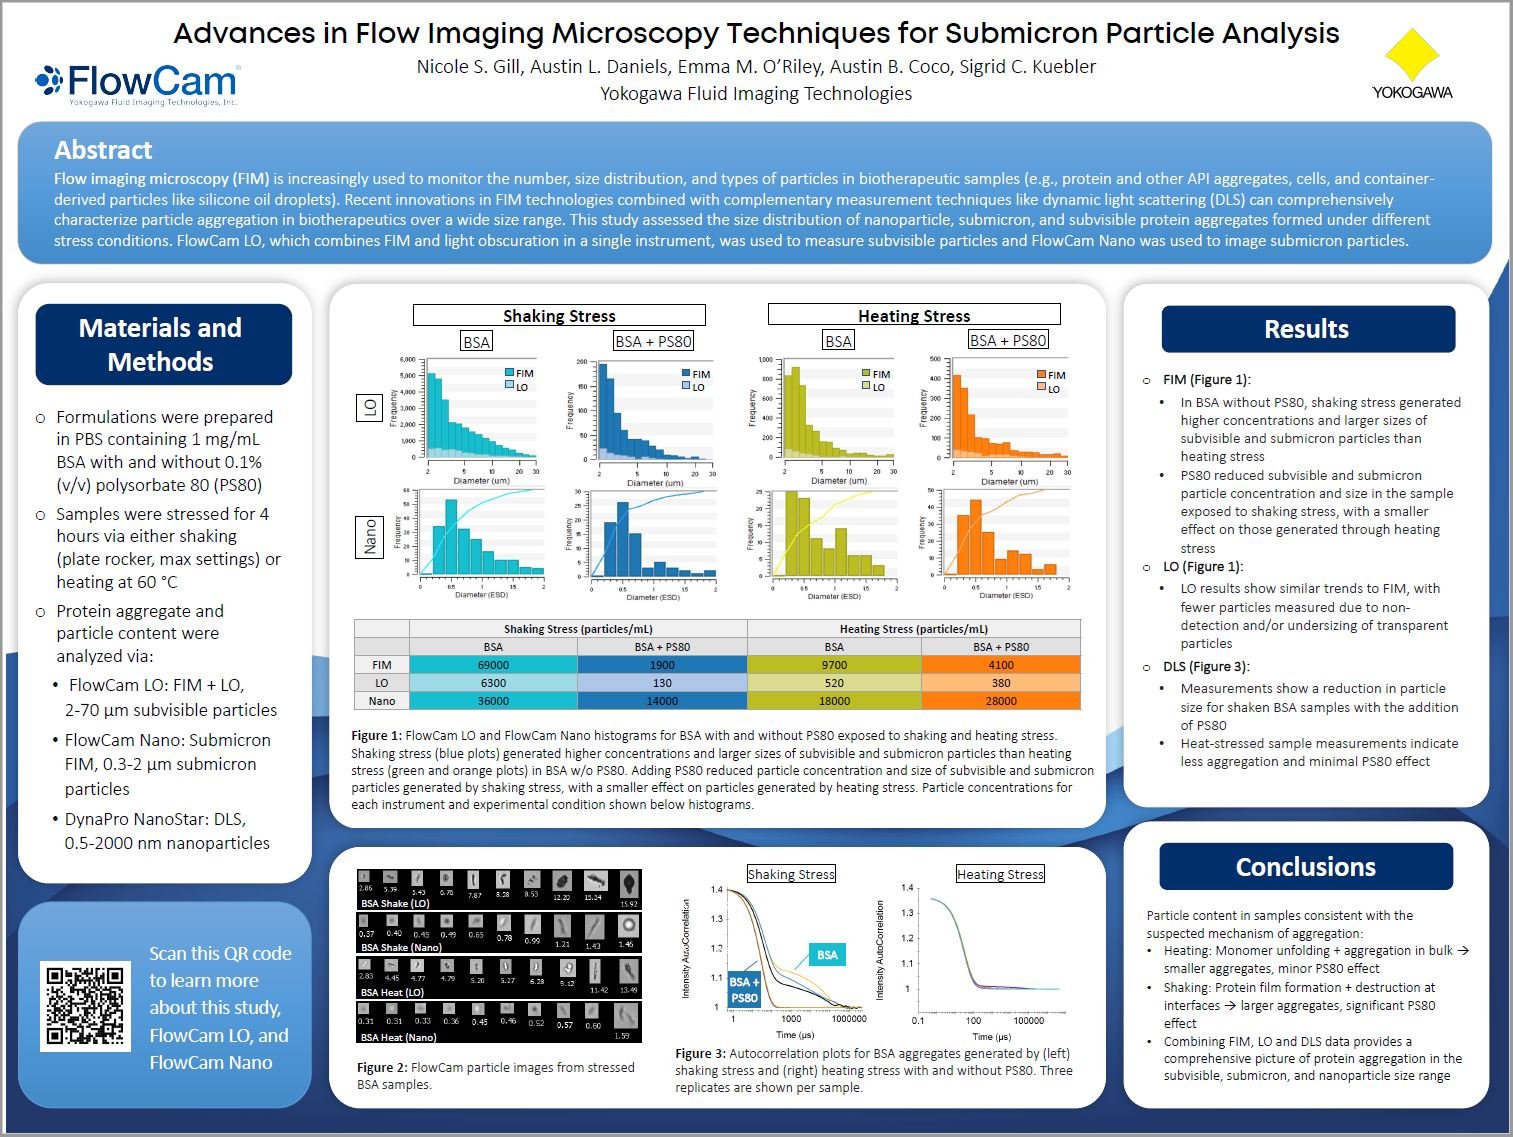 Poster thumbnail - Advances in Flow Imaging Microscopy Techniques for Submicron Particle Analysis